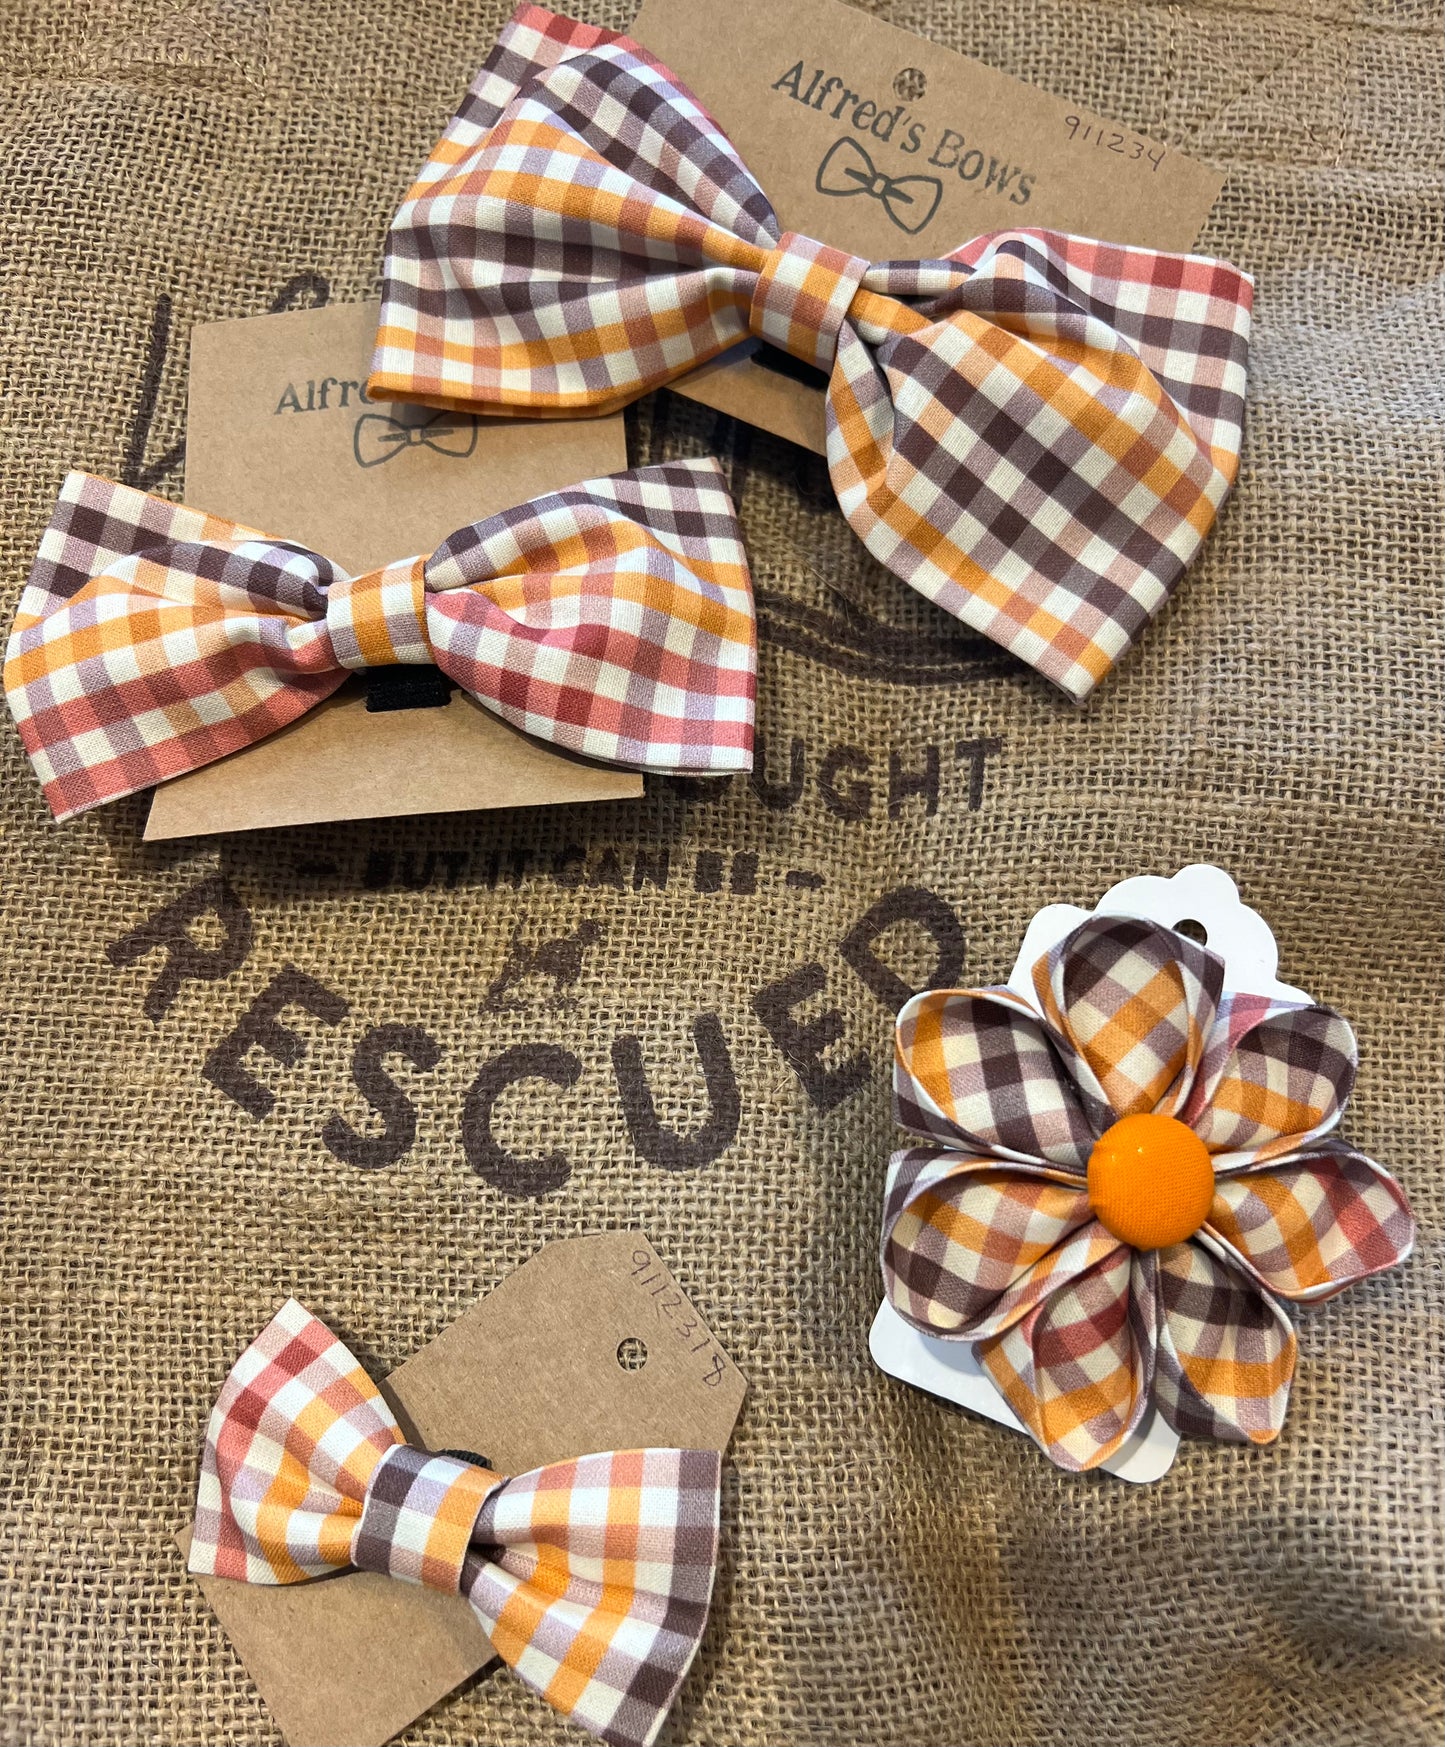 Alfred's Bows "Fall Gingham" Tiny Bow